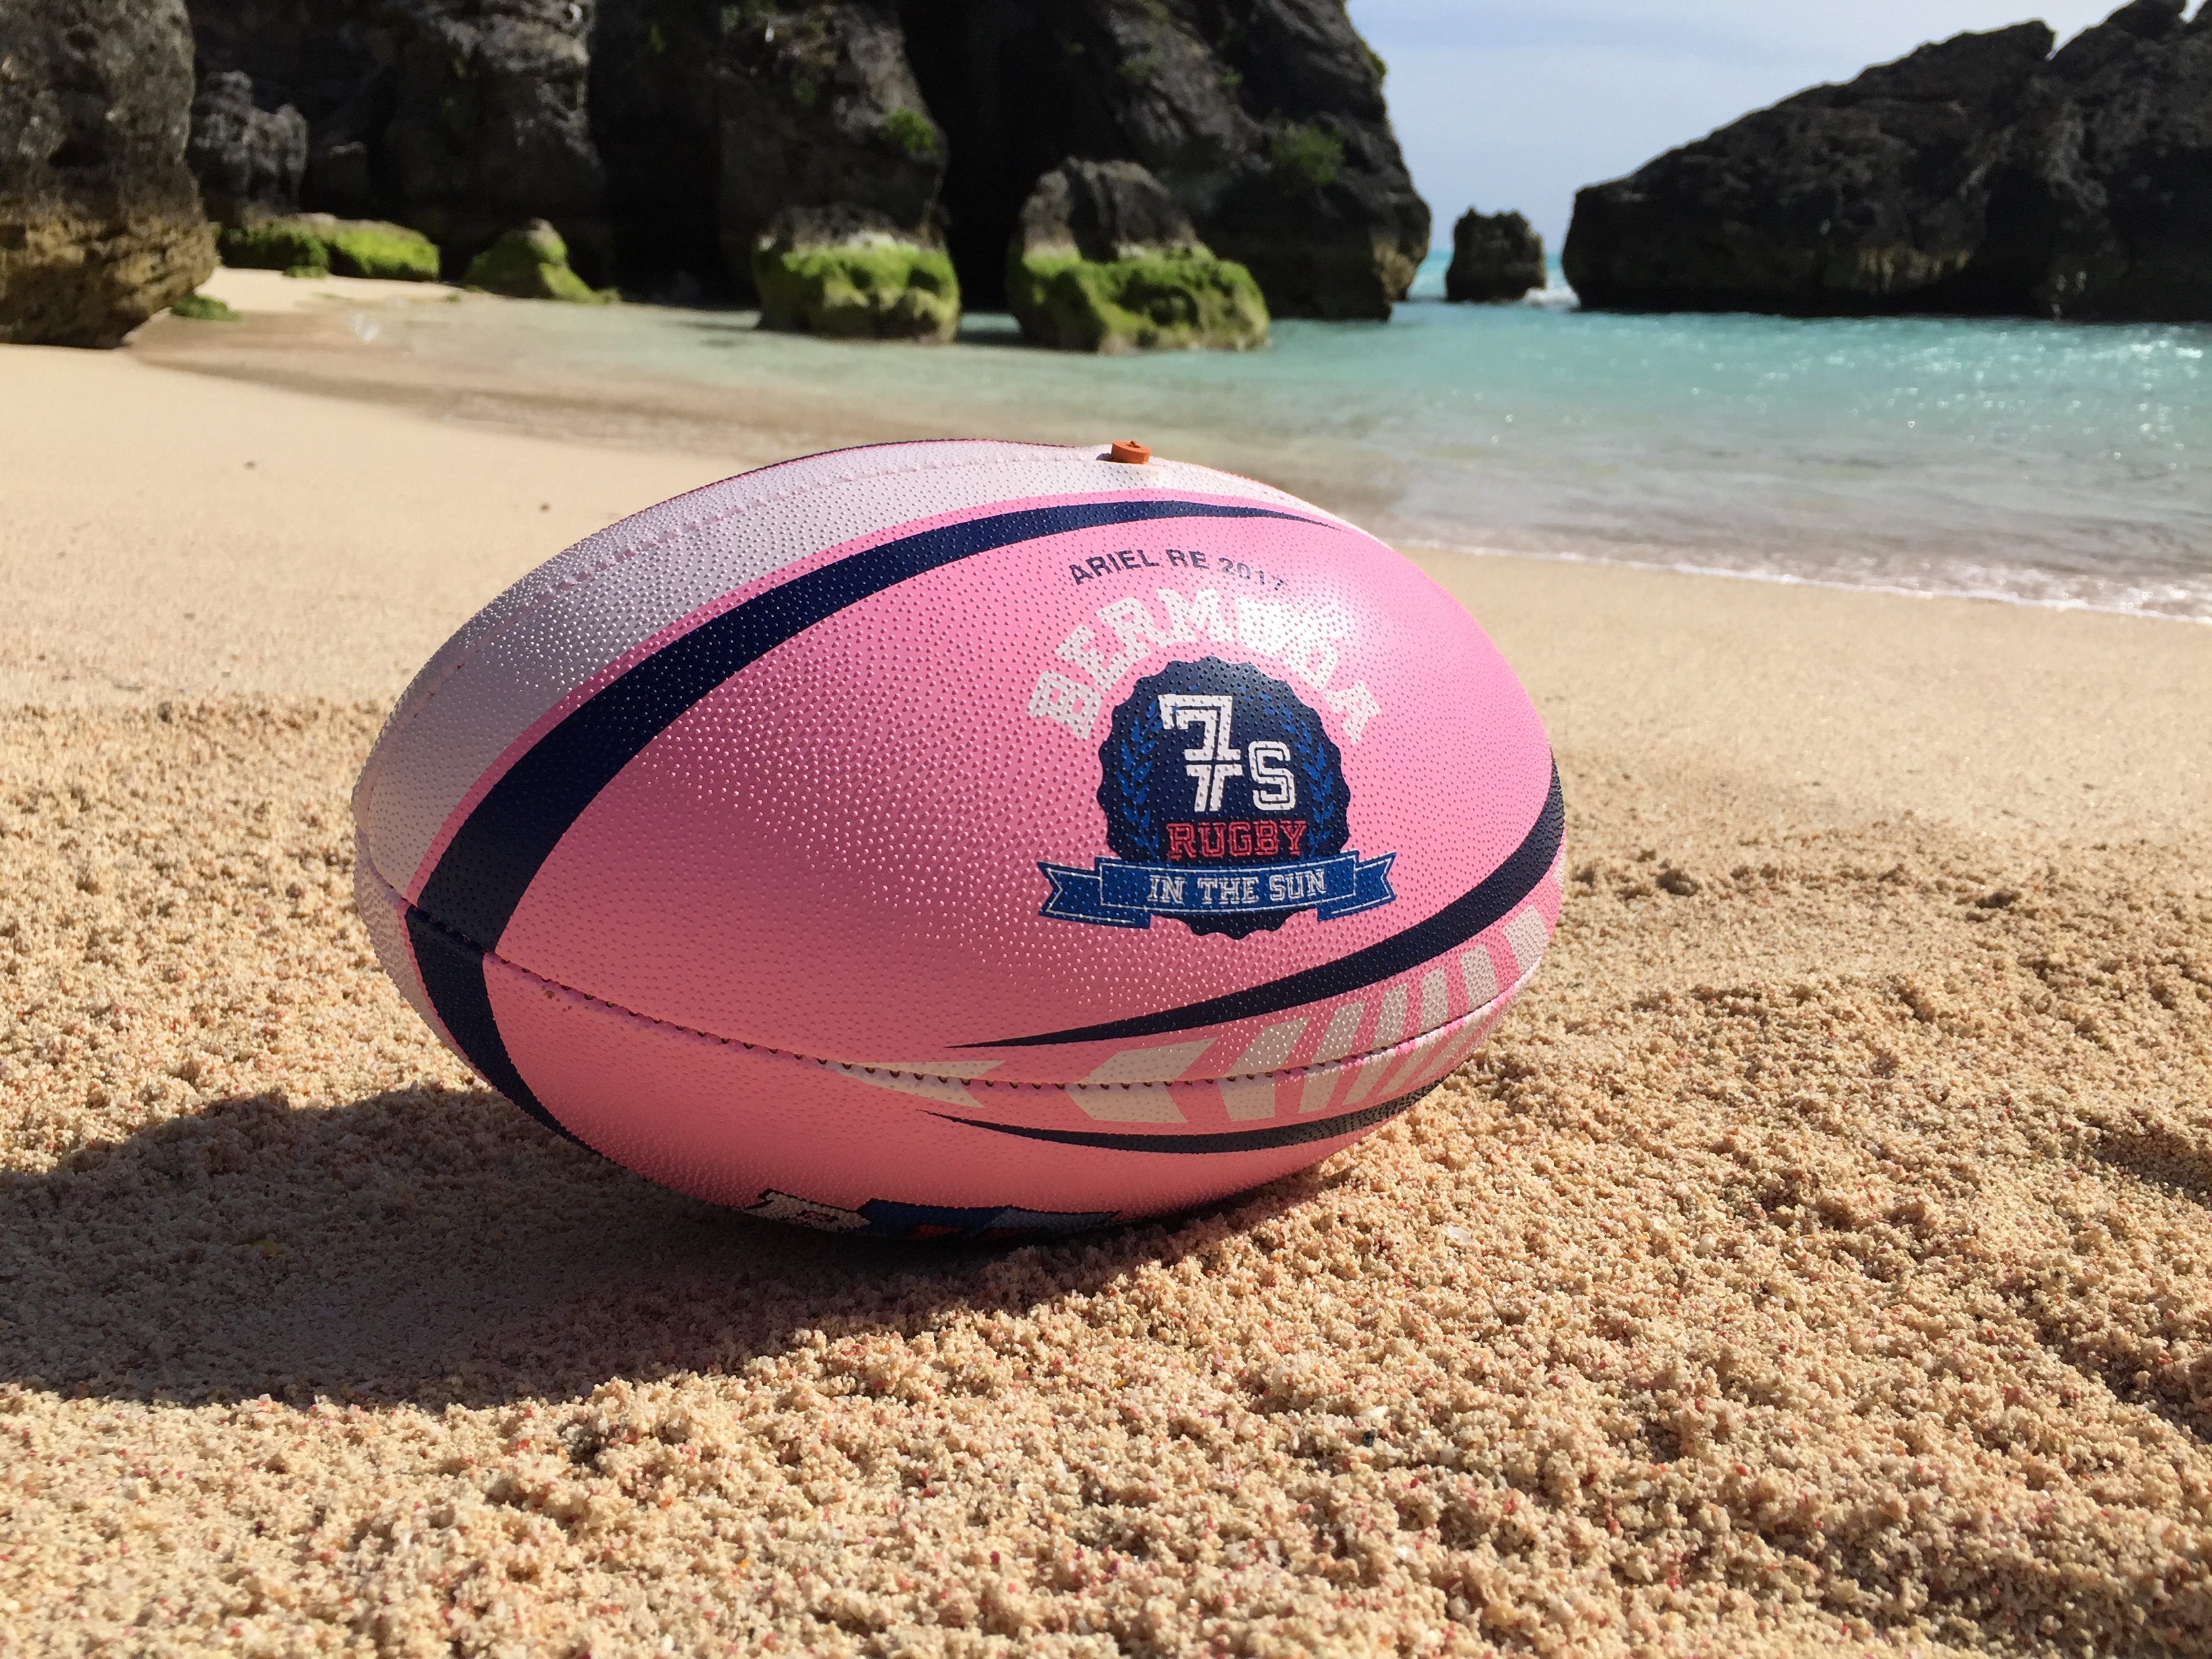 Bermuda Pinks and blue ball nestled in the sandy beaches